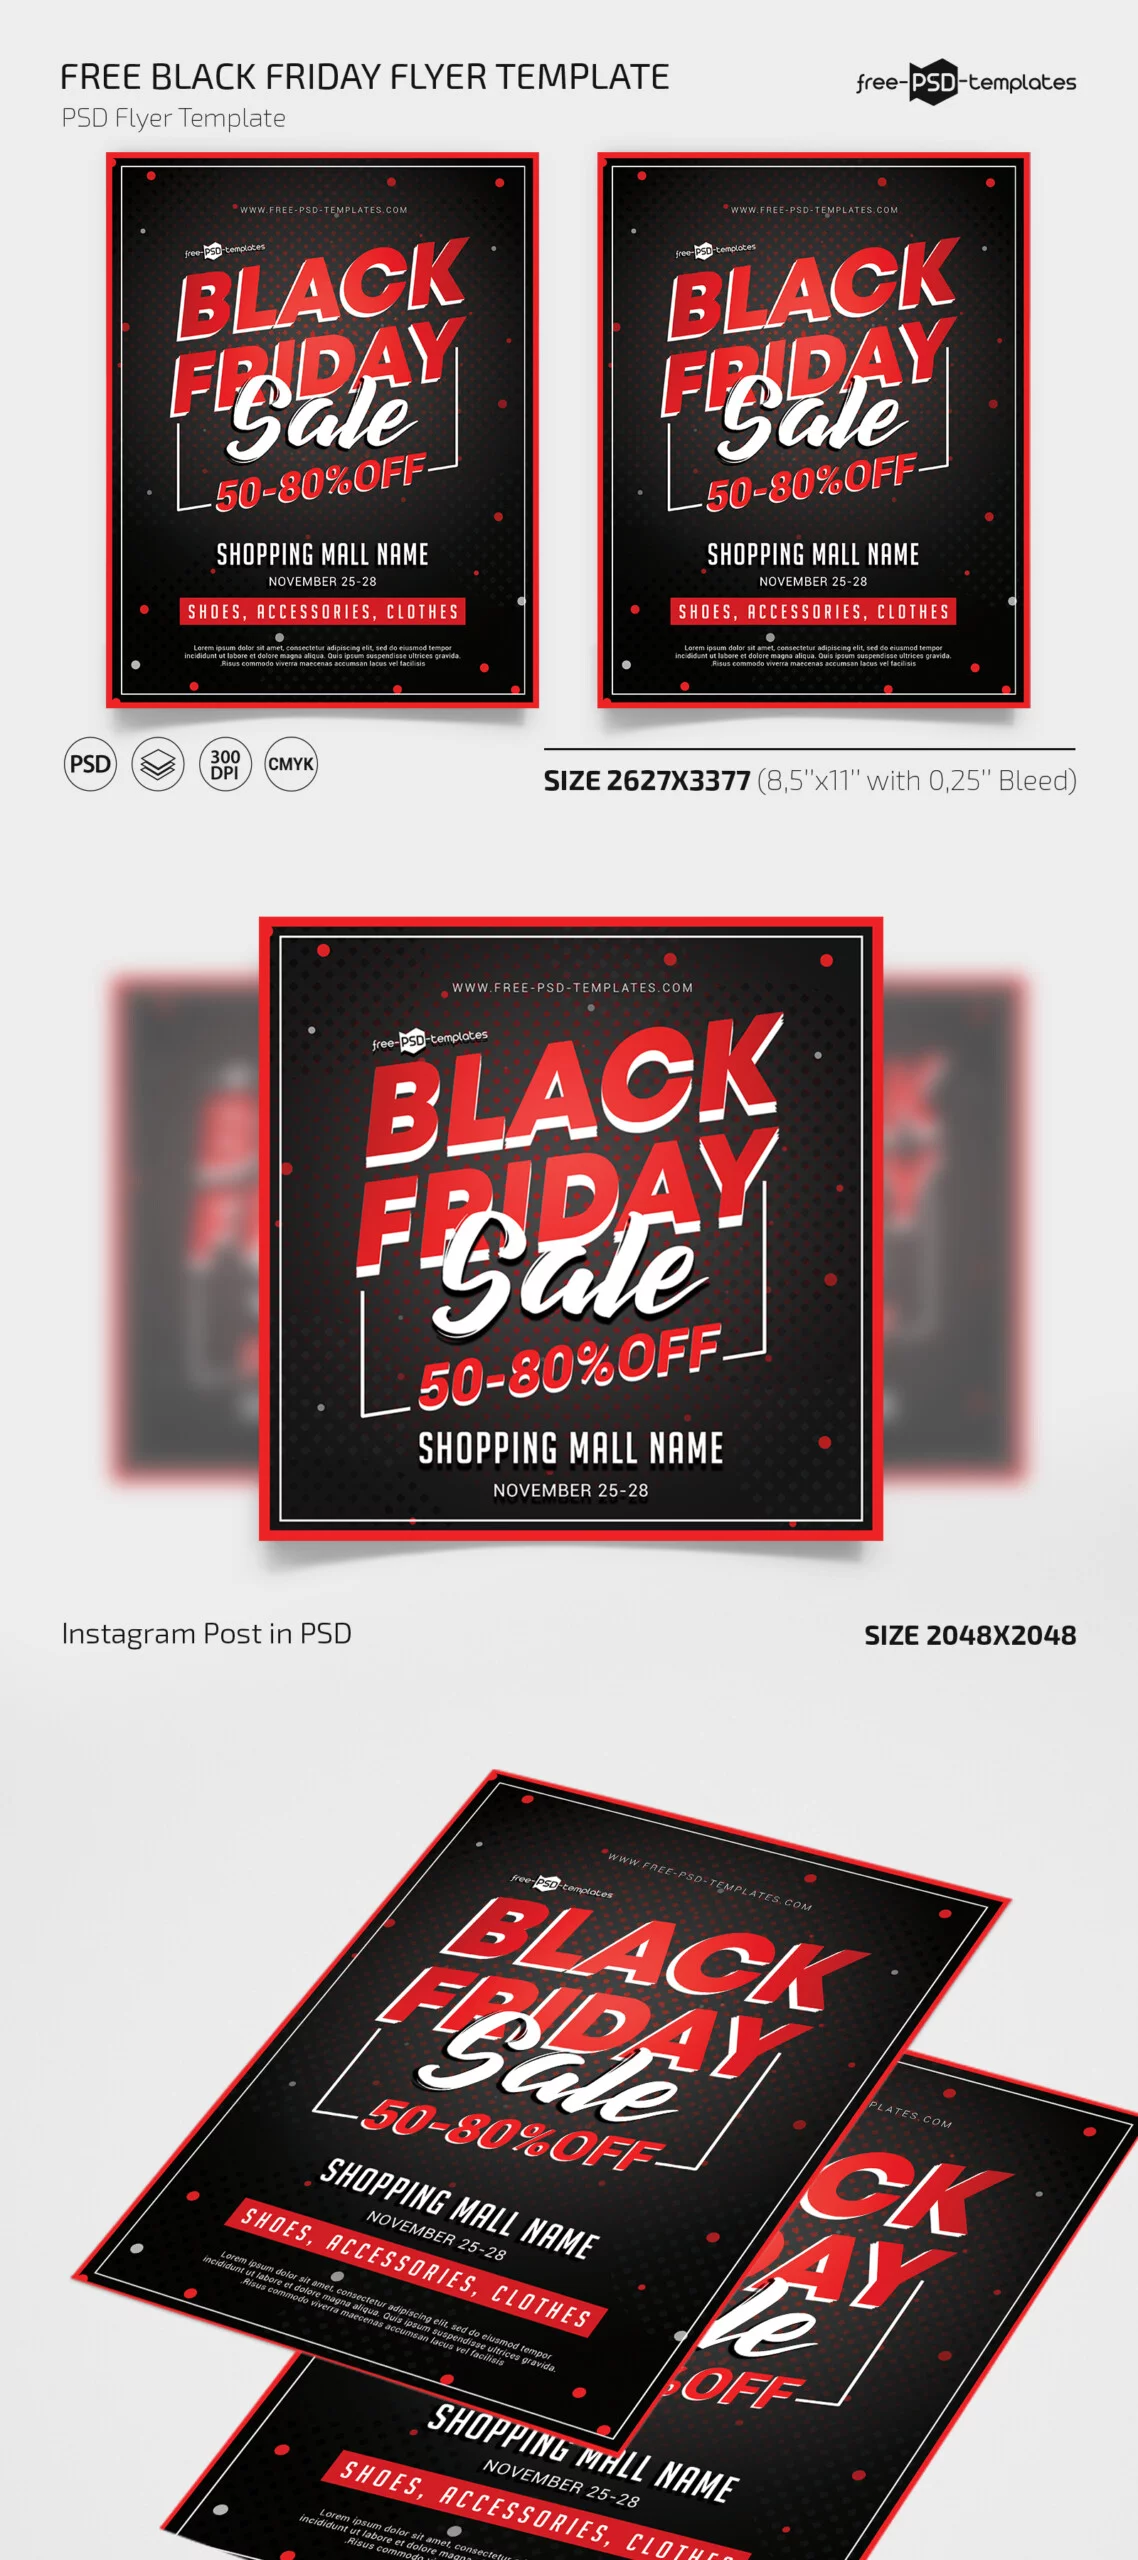 Free PSD Black Friday Flyer Template